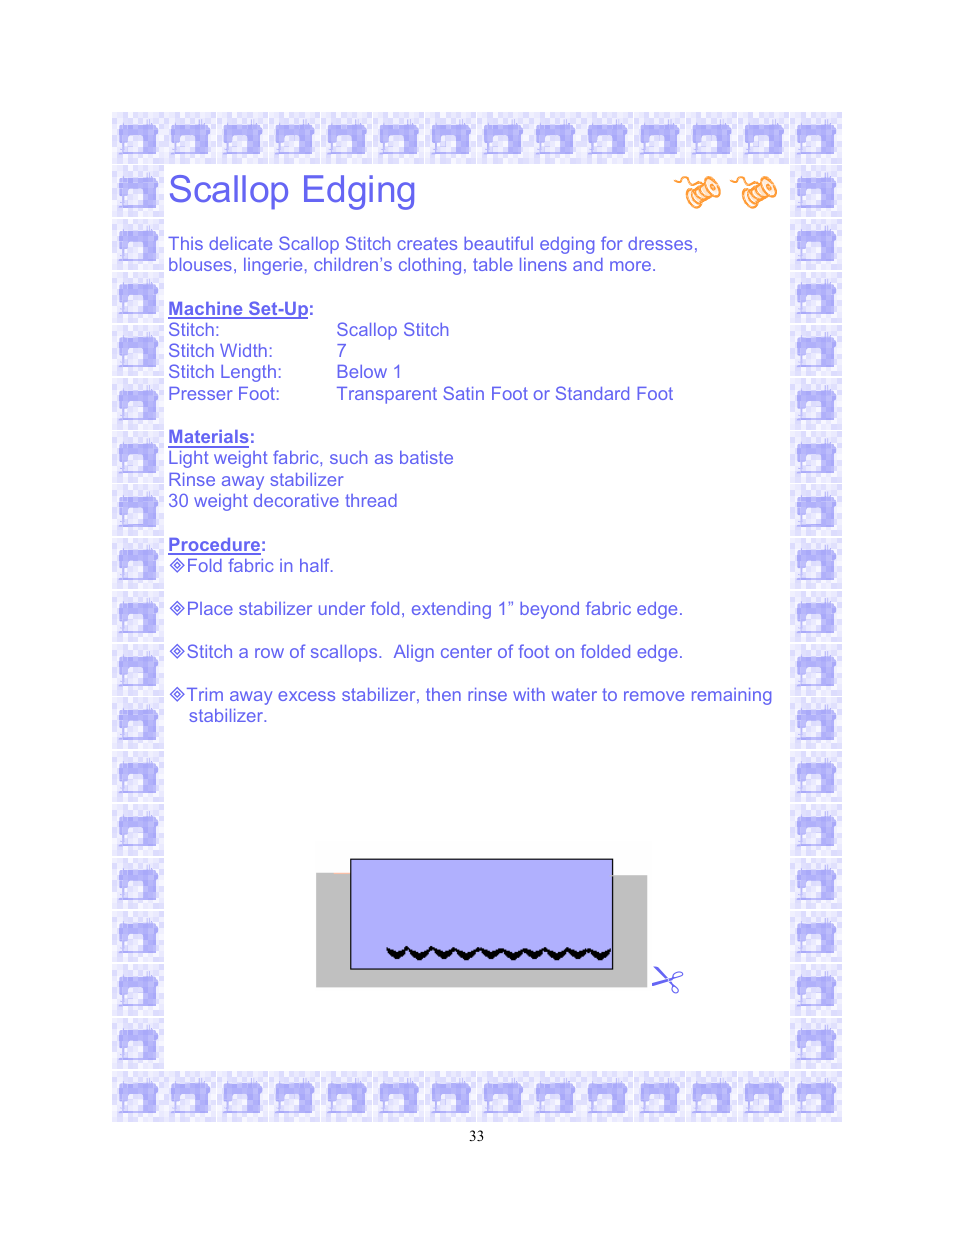 Scallop edging | SINGER 6550-WORKBOOK Scholastic User Manual | Page 37 / 59